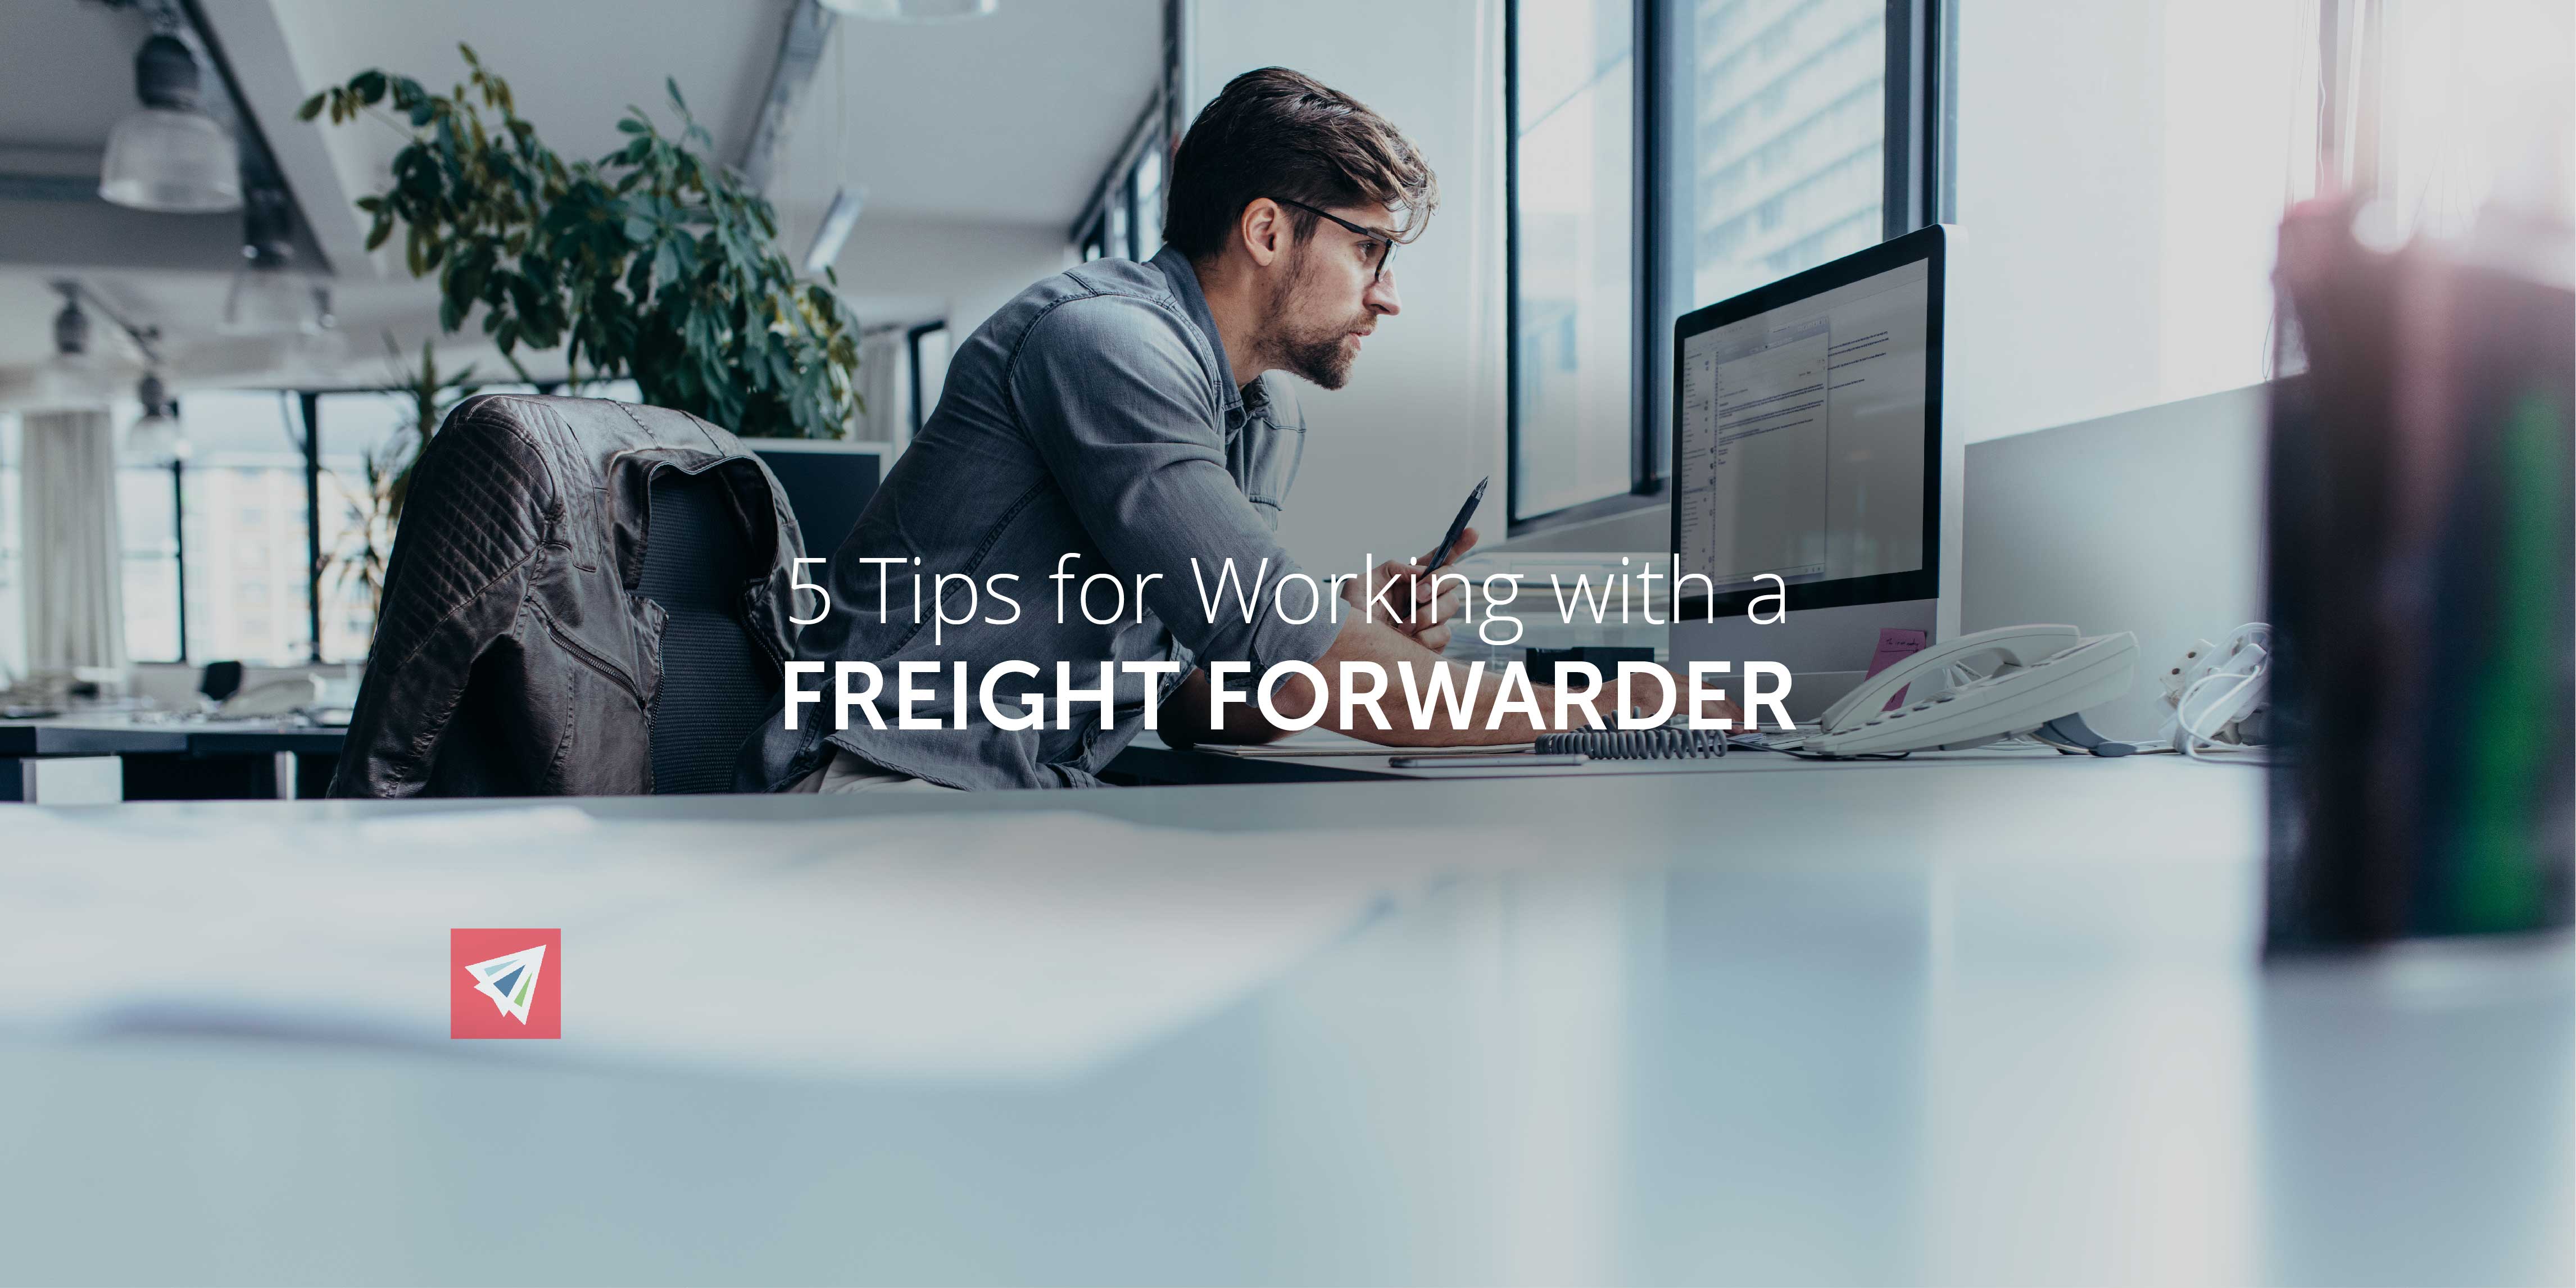 5 Tips for Working with a Freight Forwarder